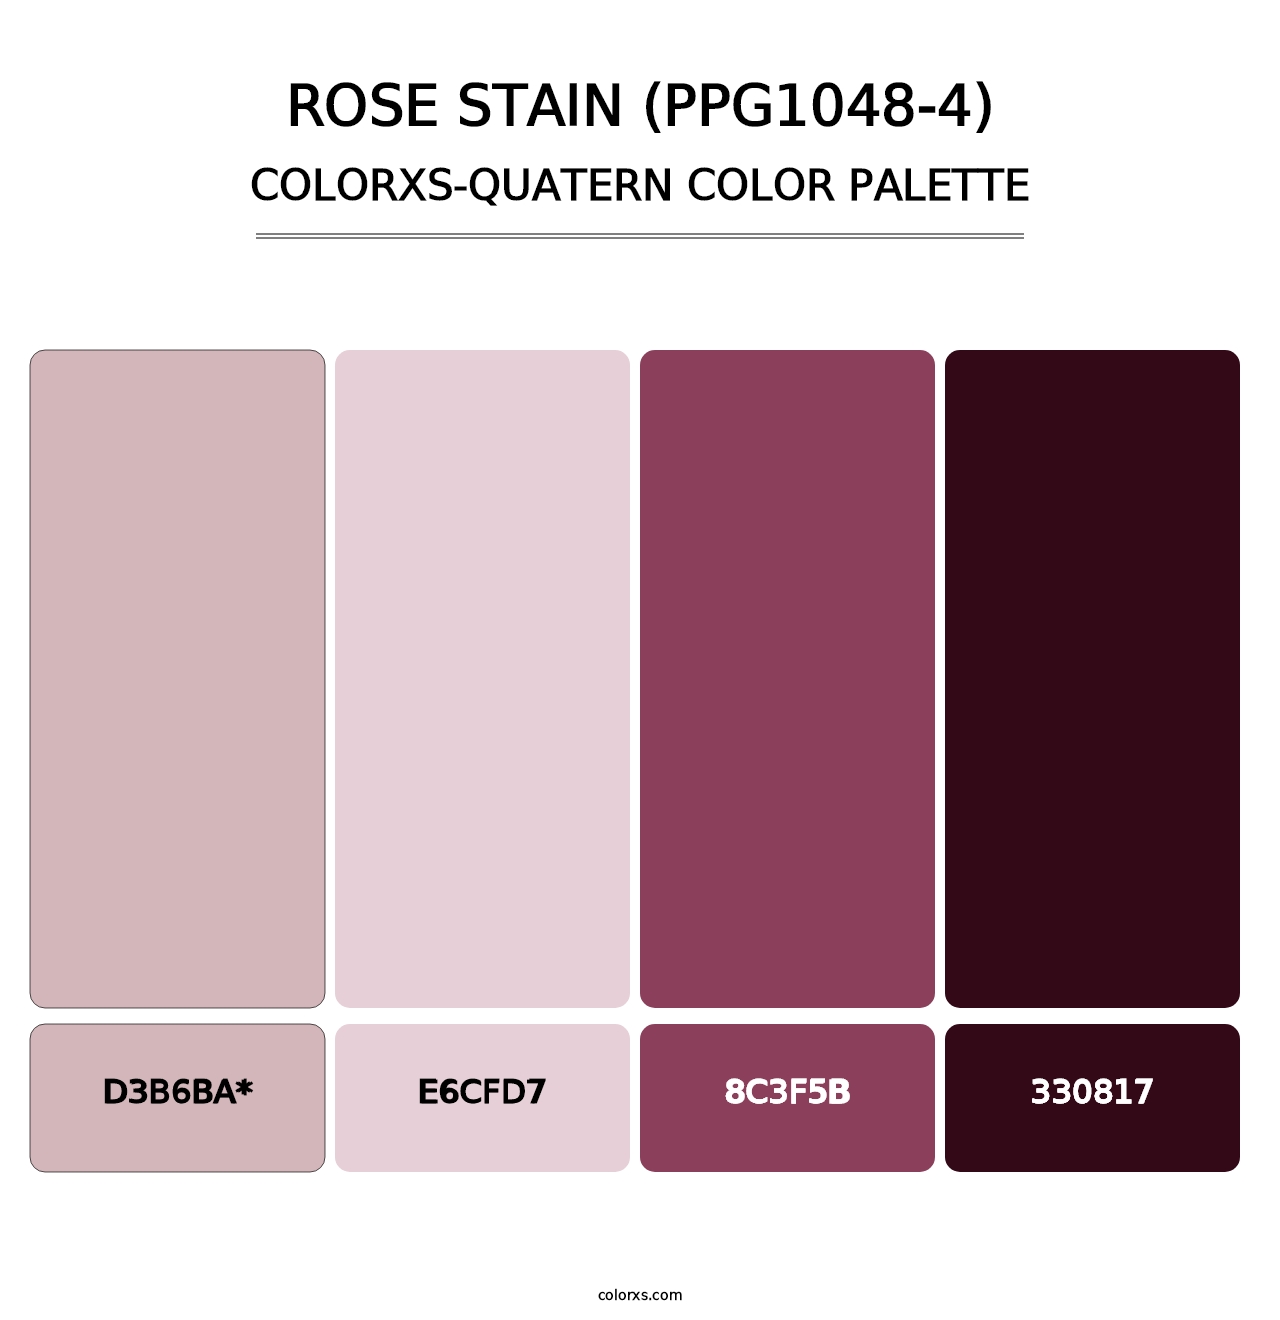 Rose Stain (PPG1048-4) - Colorxs Quatern Palette